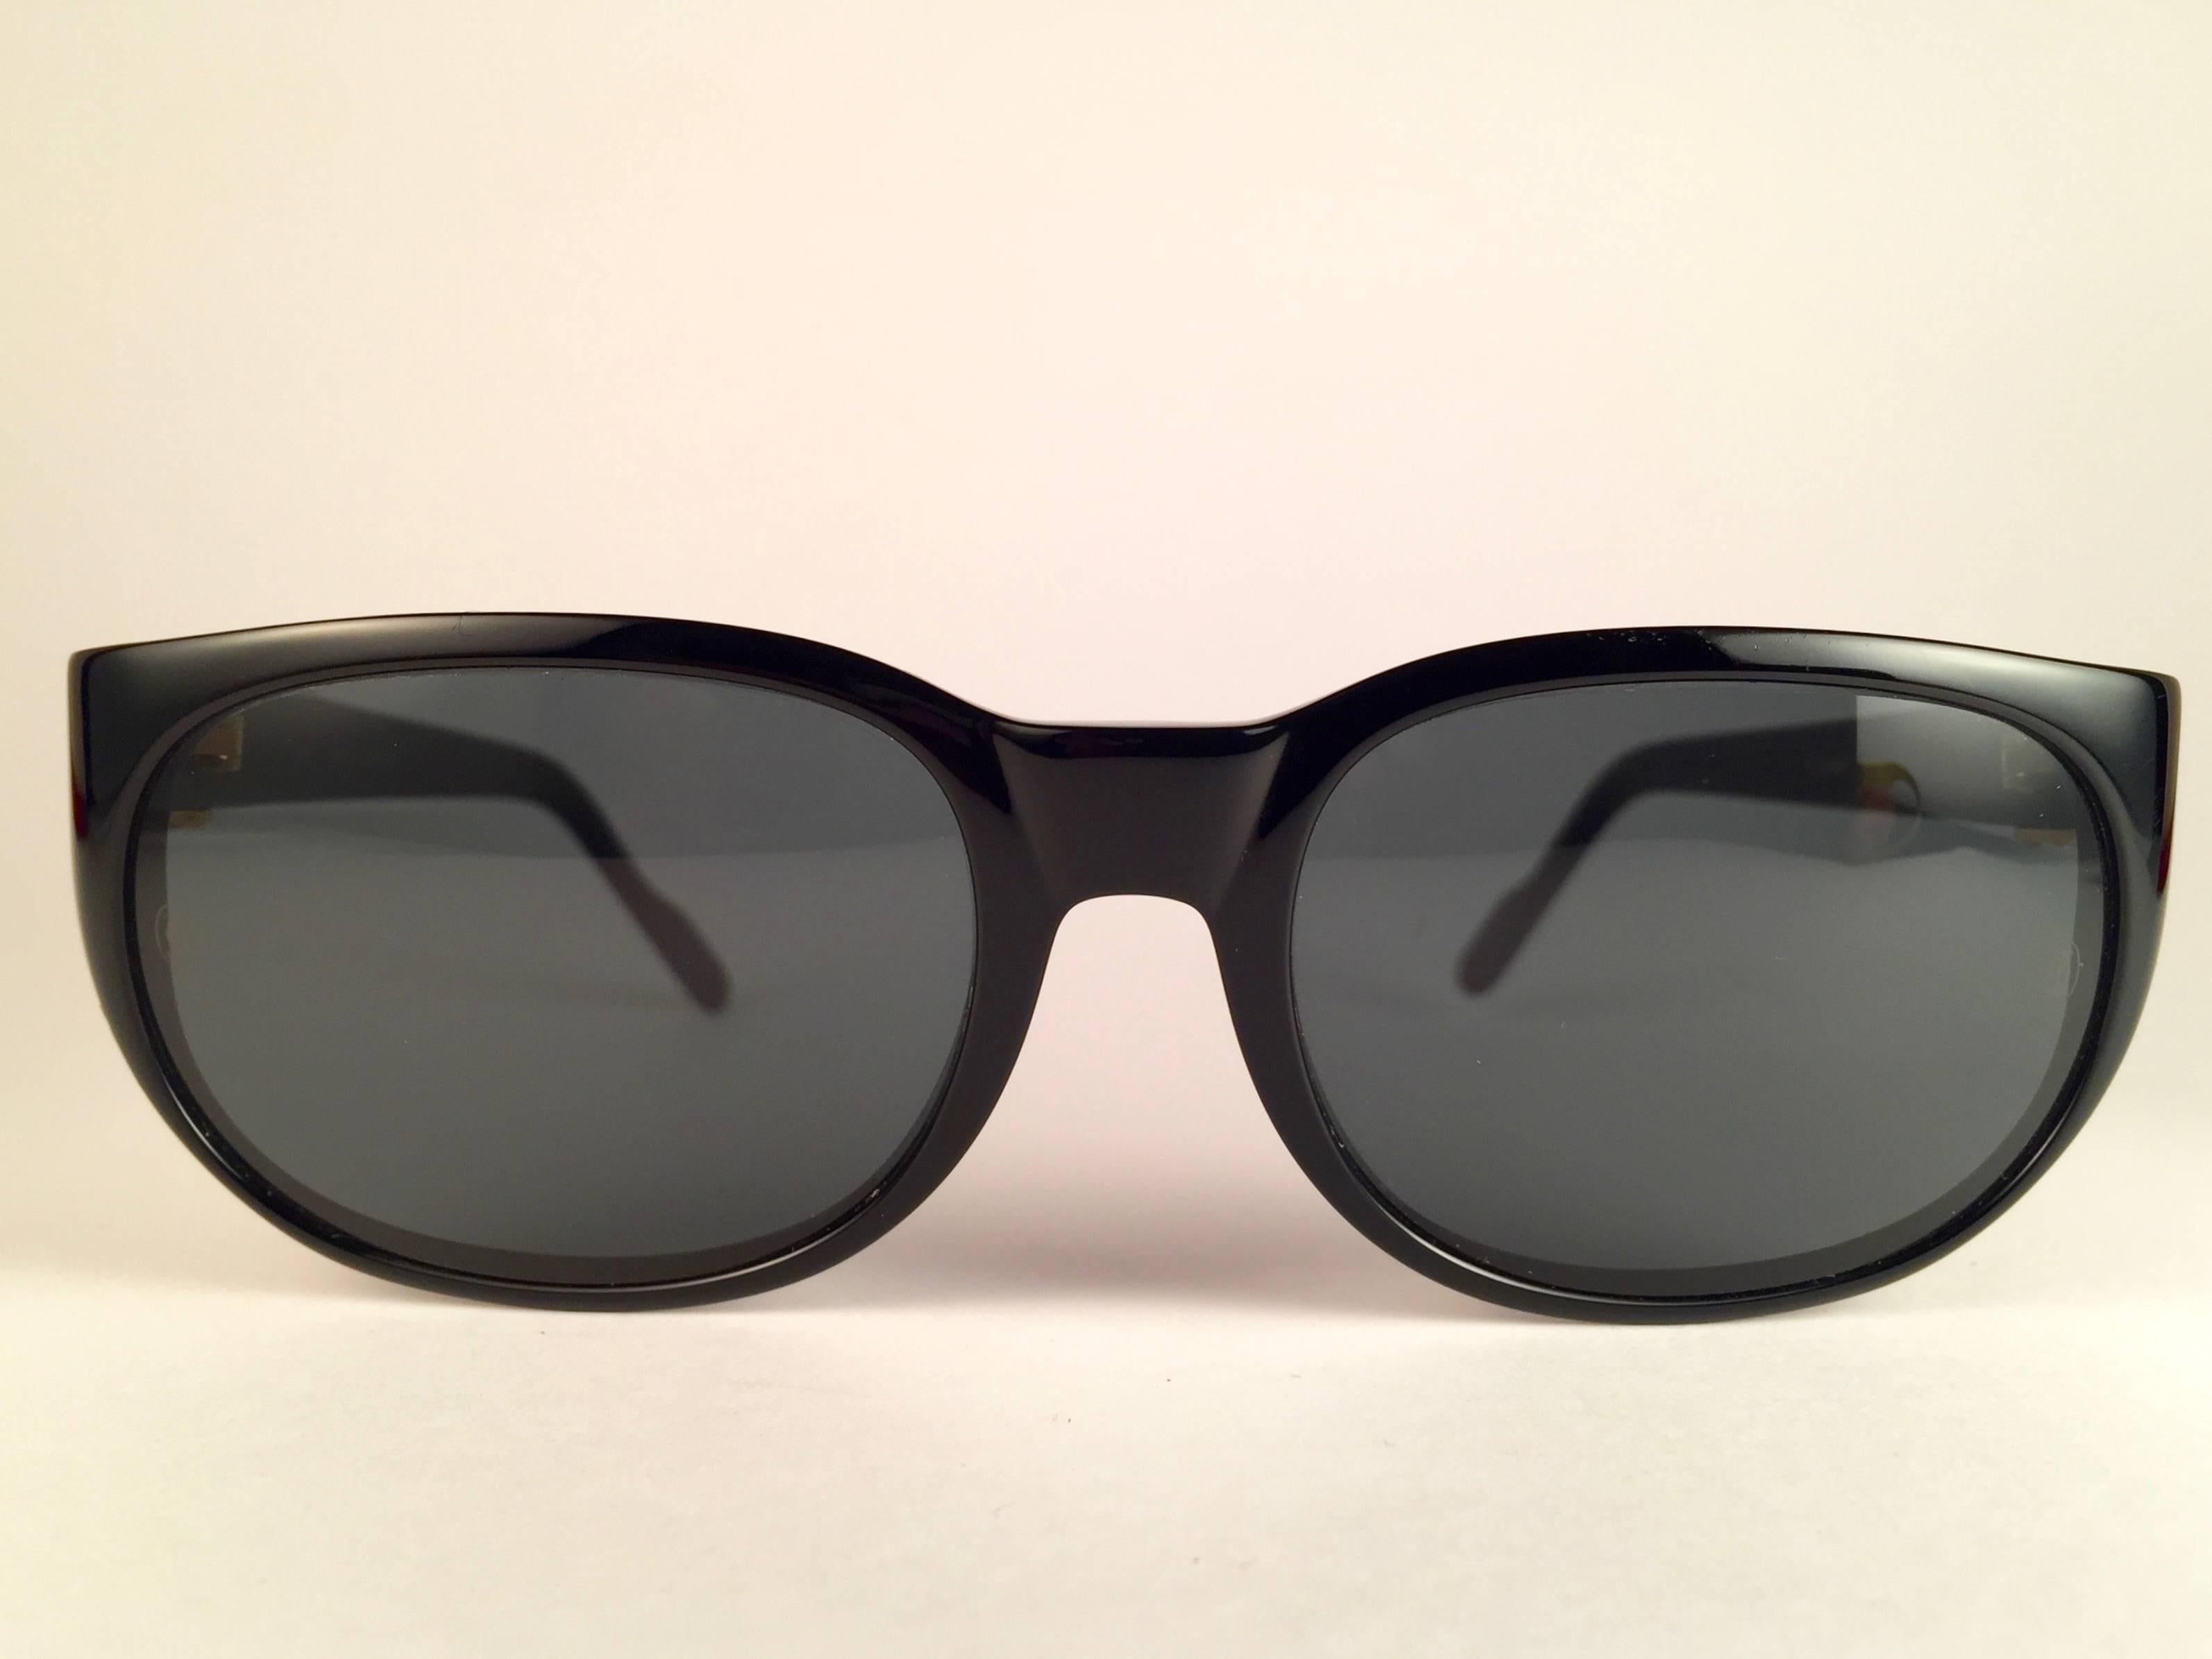 New, original Cartier classy Trinity sunglasses with G15 ( Grey ) (uv protection ) Cartier lenses. 
Frame is black and has the famous real gold and white gold accents. 
All hallmarks. Both arms sport the famous gold trinity sign from Cartier on the